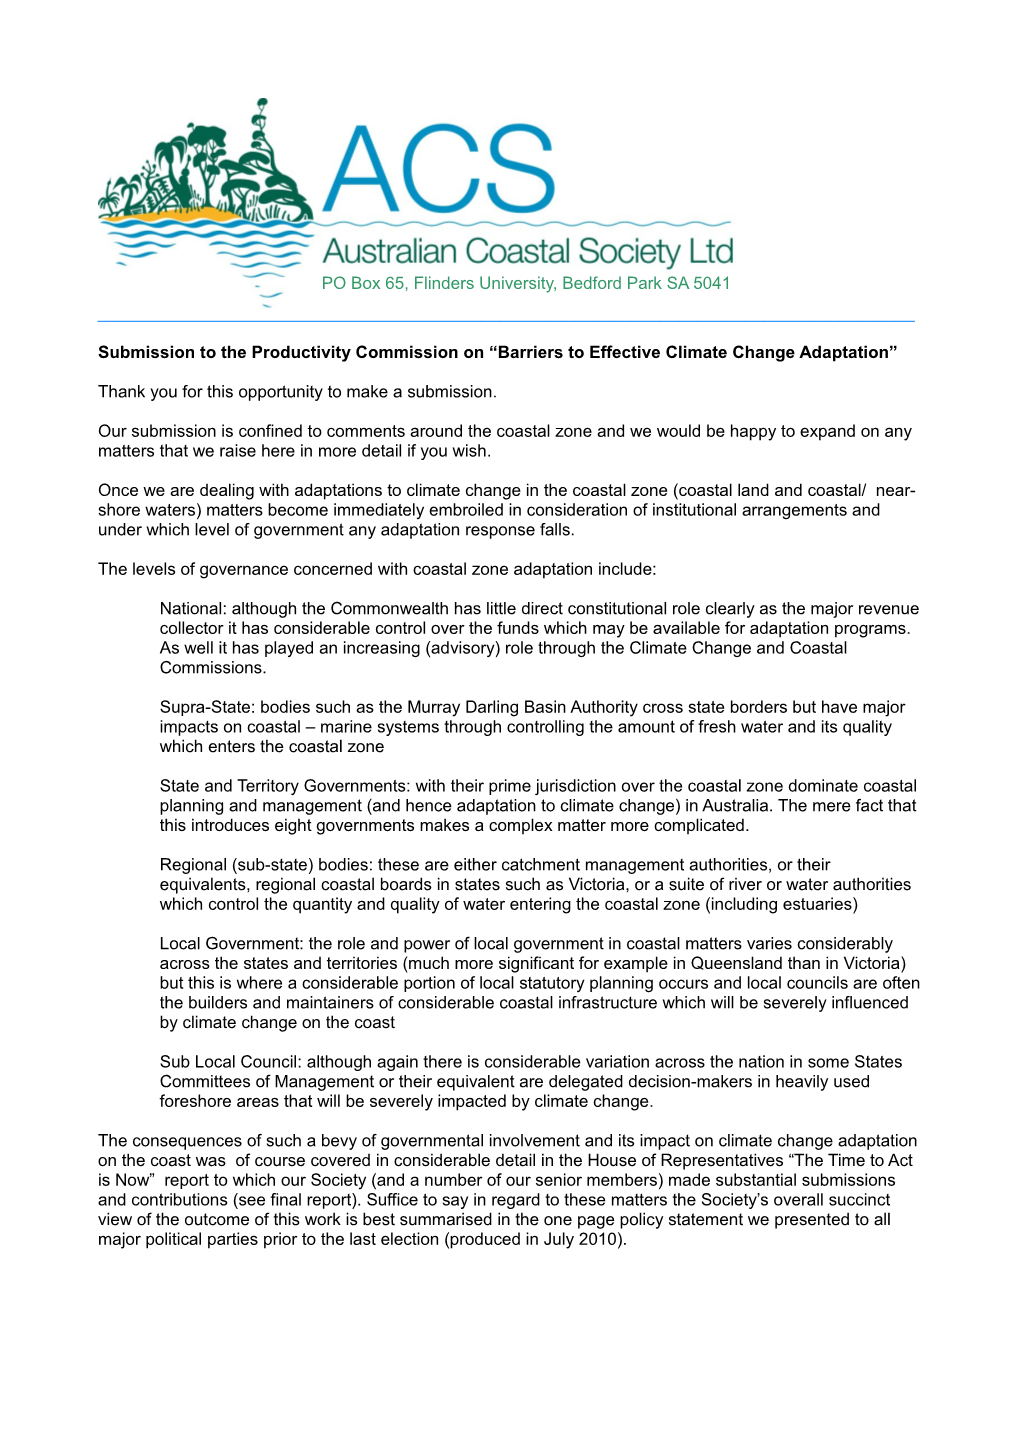 Submission 15 - Australian Coastal Society - Barriers to Effective Climate Change Adaptation